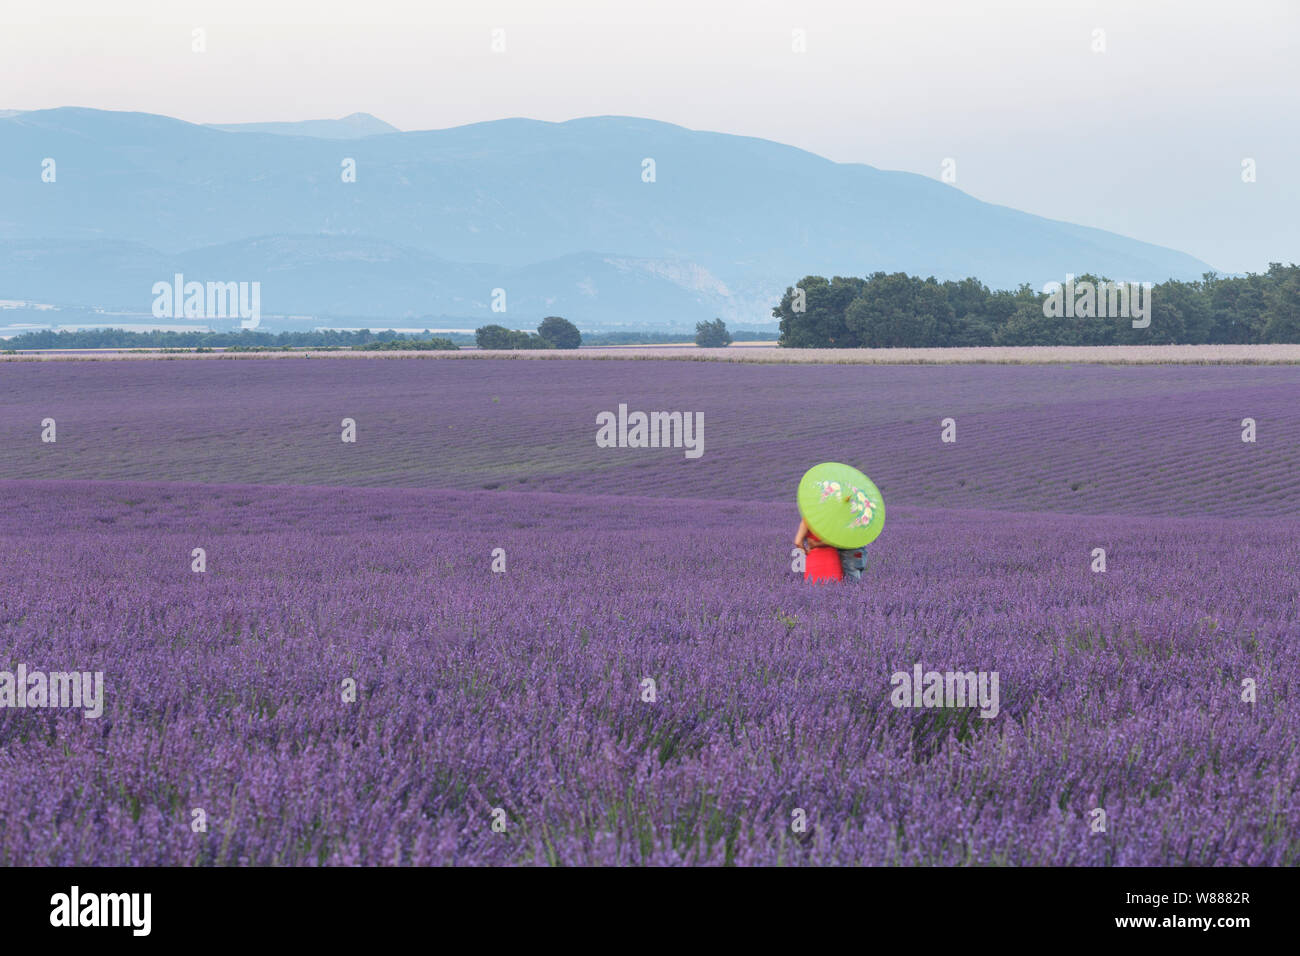 A woman stands in a field of lavender on the Plateau de Valensole, Provence, France. Stock Photo